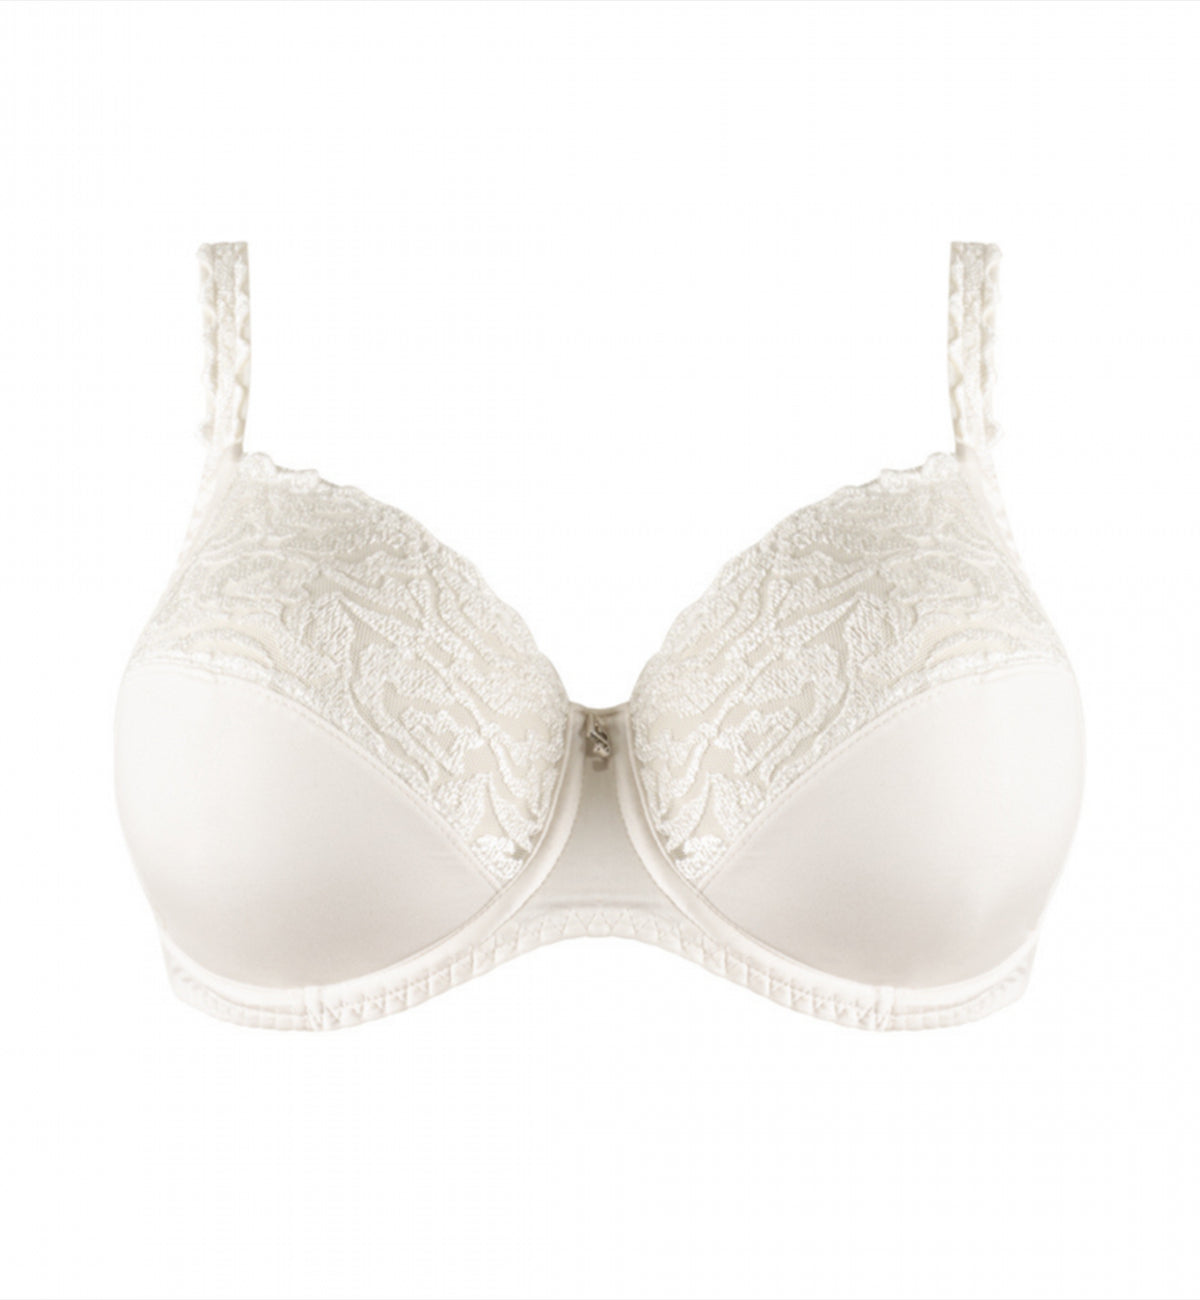 Louisa Bracq Electric Waves Full Cup Underwire Bra (49401),30G,Pearl - Pearl,30G